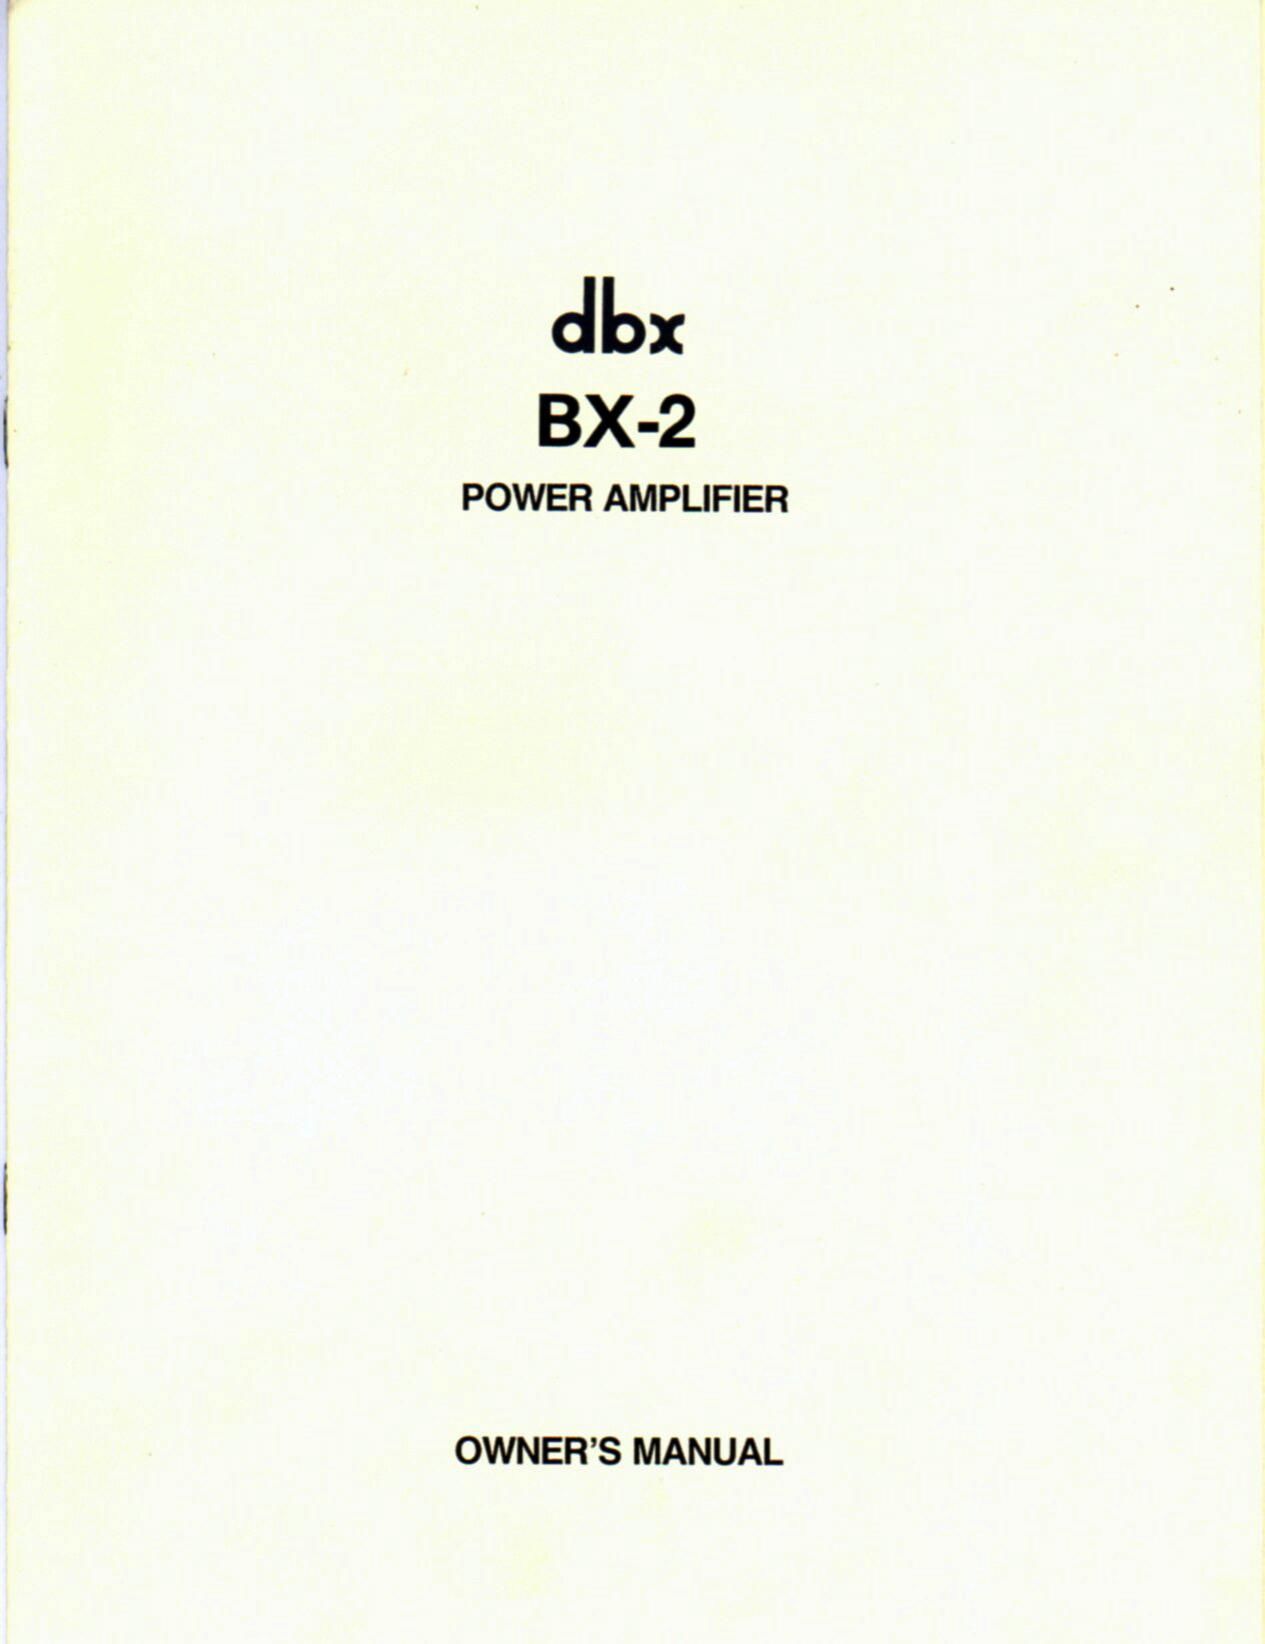 DBX BX2 Owners Manual